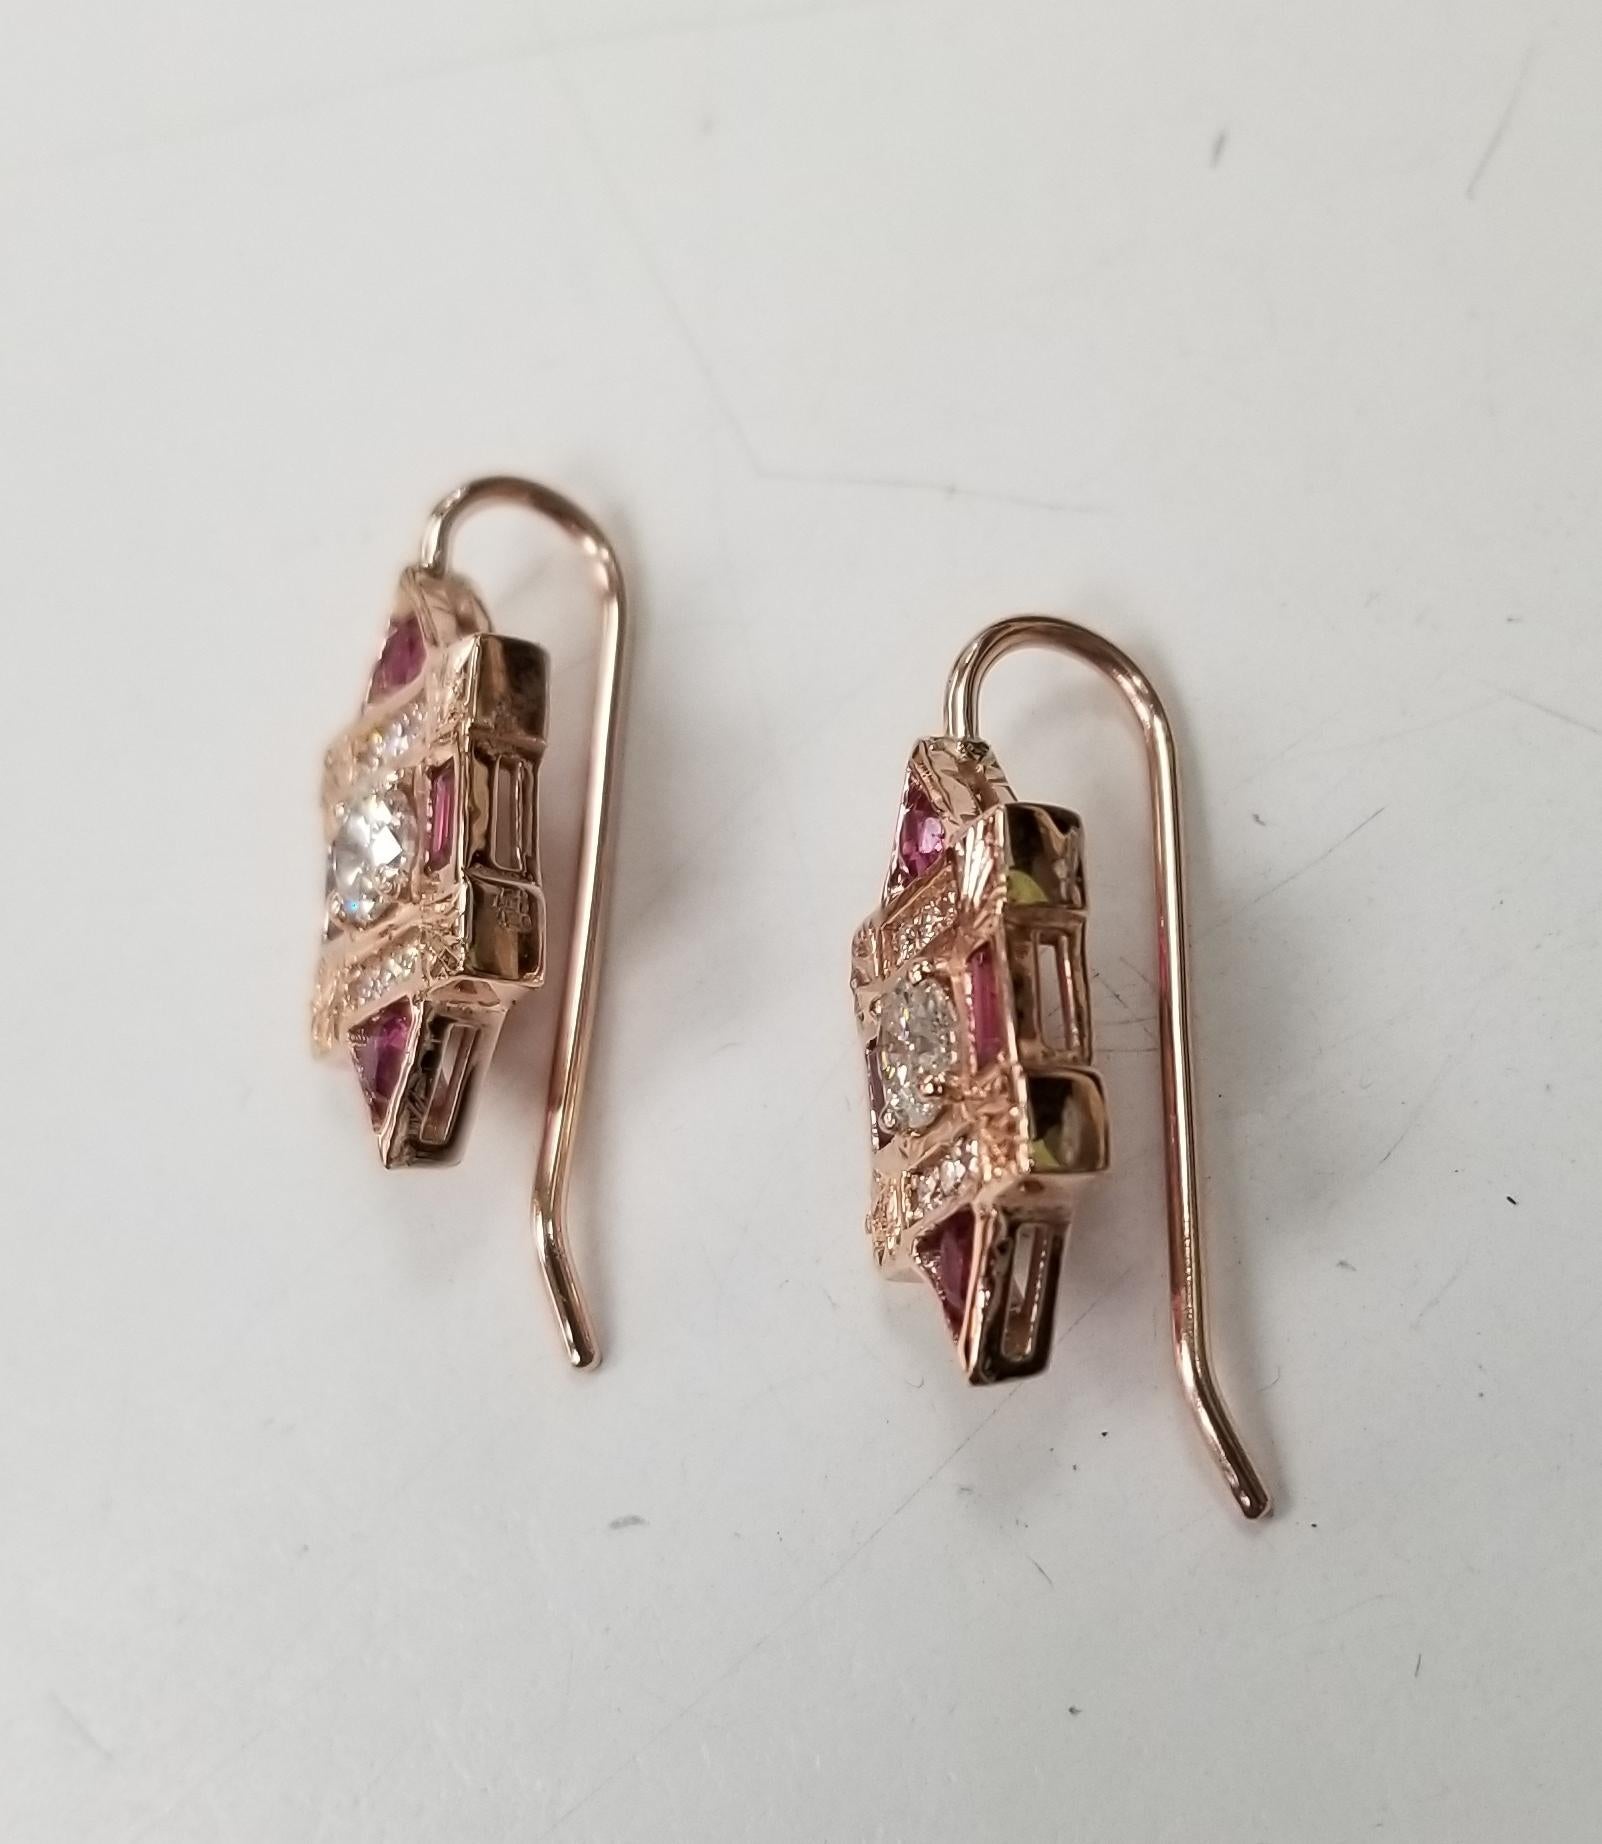 Retro Classic Art Deco Style Inspired Earrings w/ Diamonds and Rubies in 14k Rose Gold